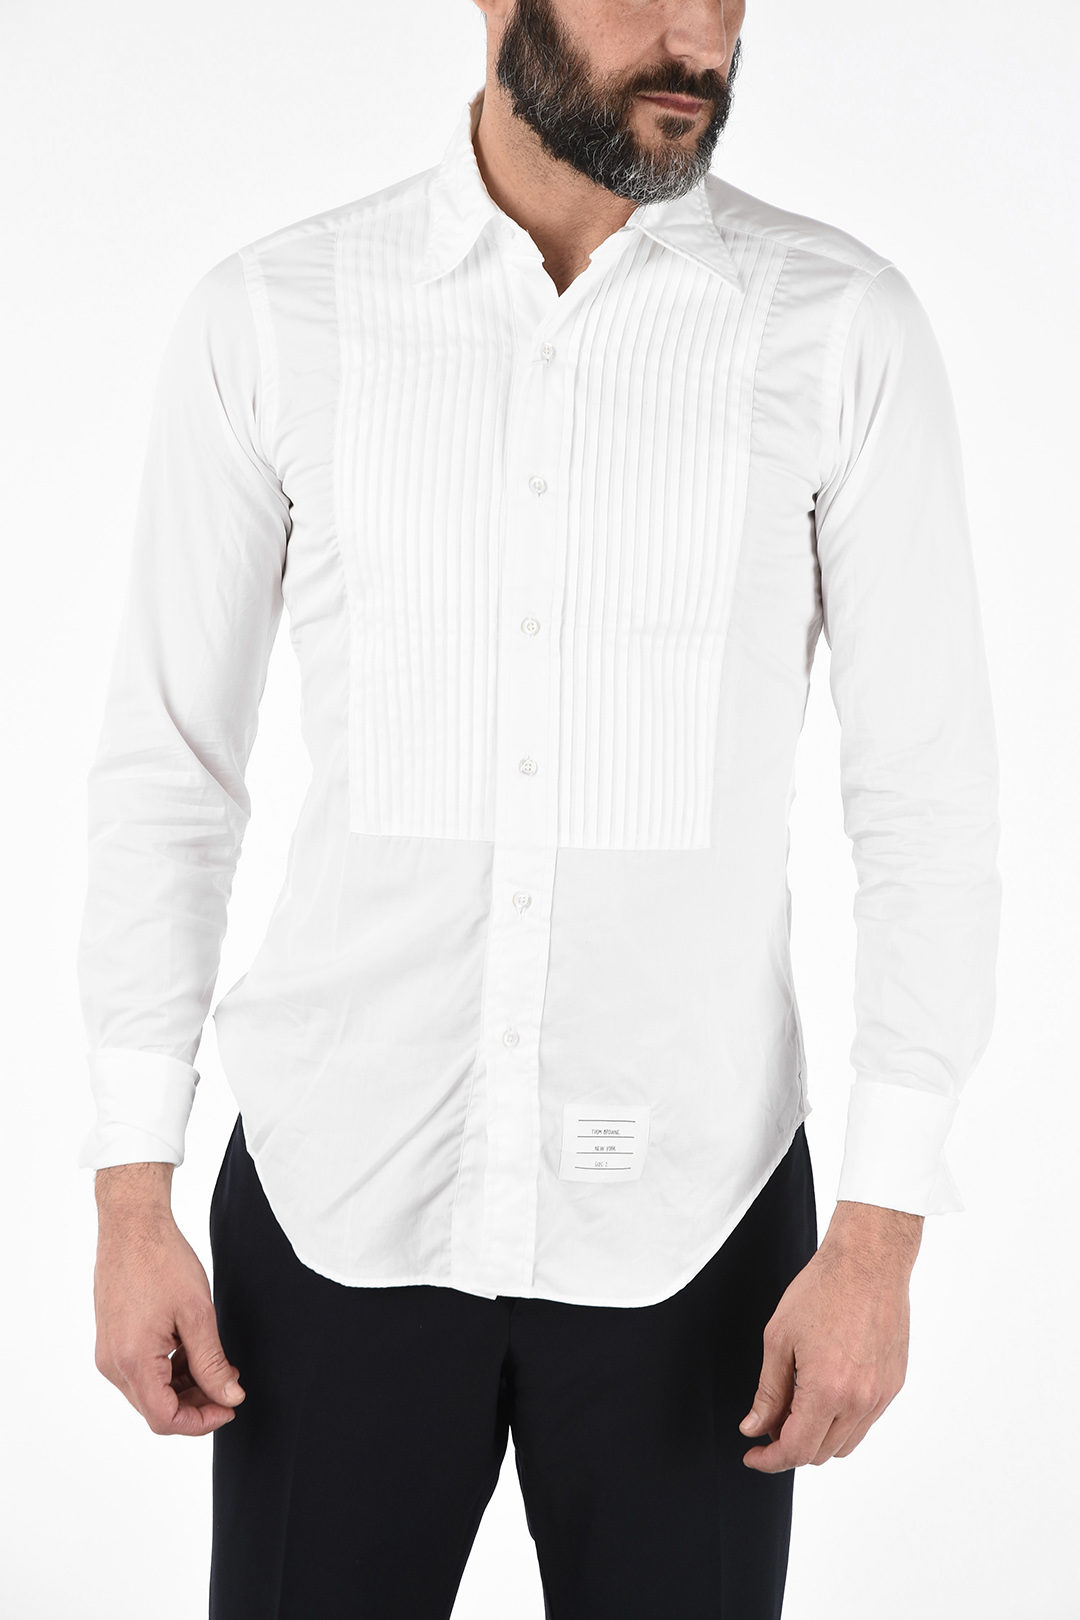 Thom Browne Spread Collar Shirt with Plastron men - Glamood Outlet